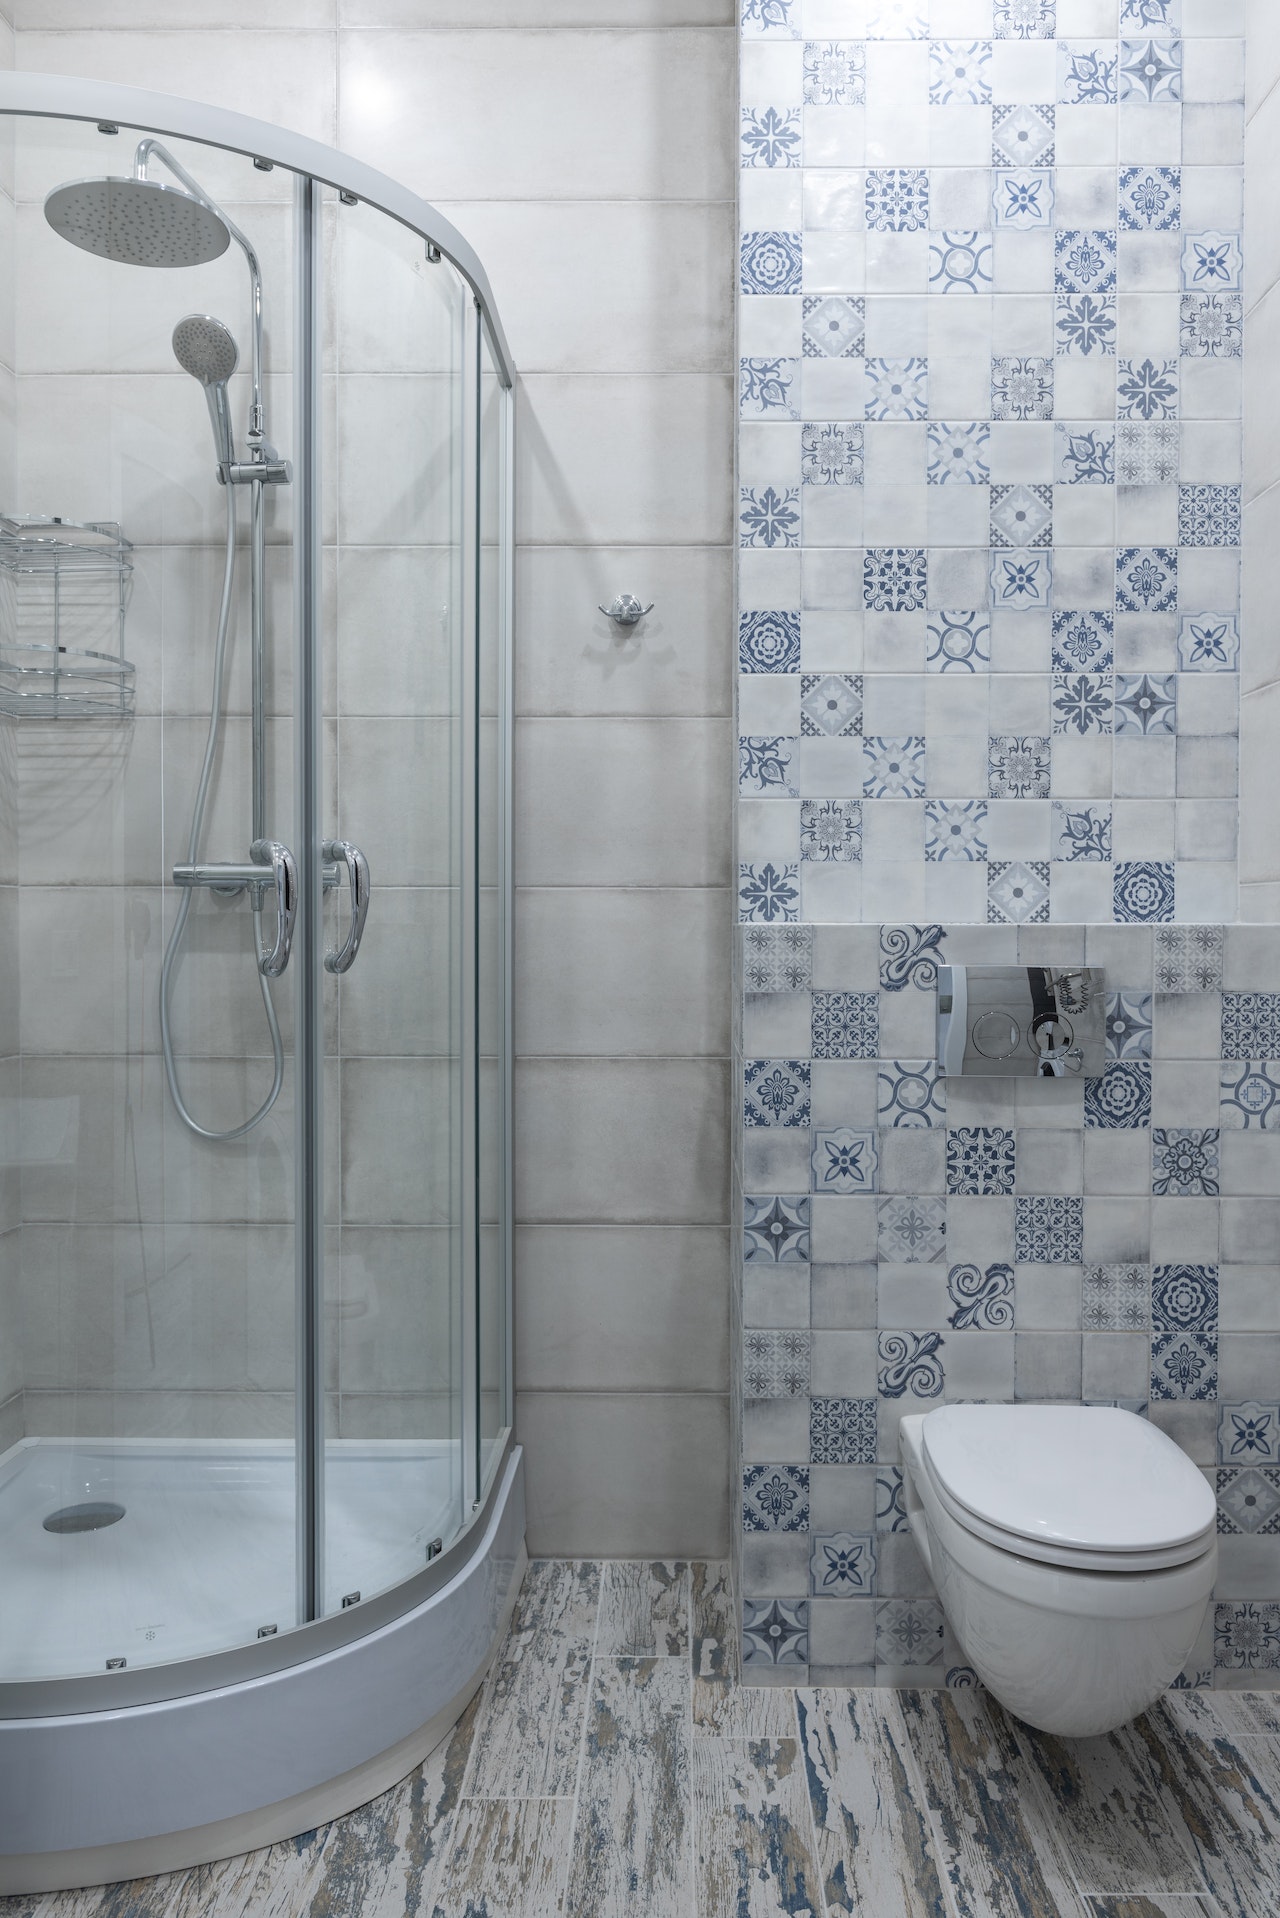 Shower Installation: Why You Should Consider Installing a Shower in Your House